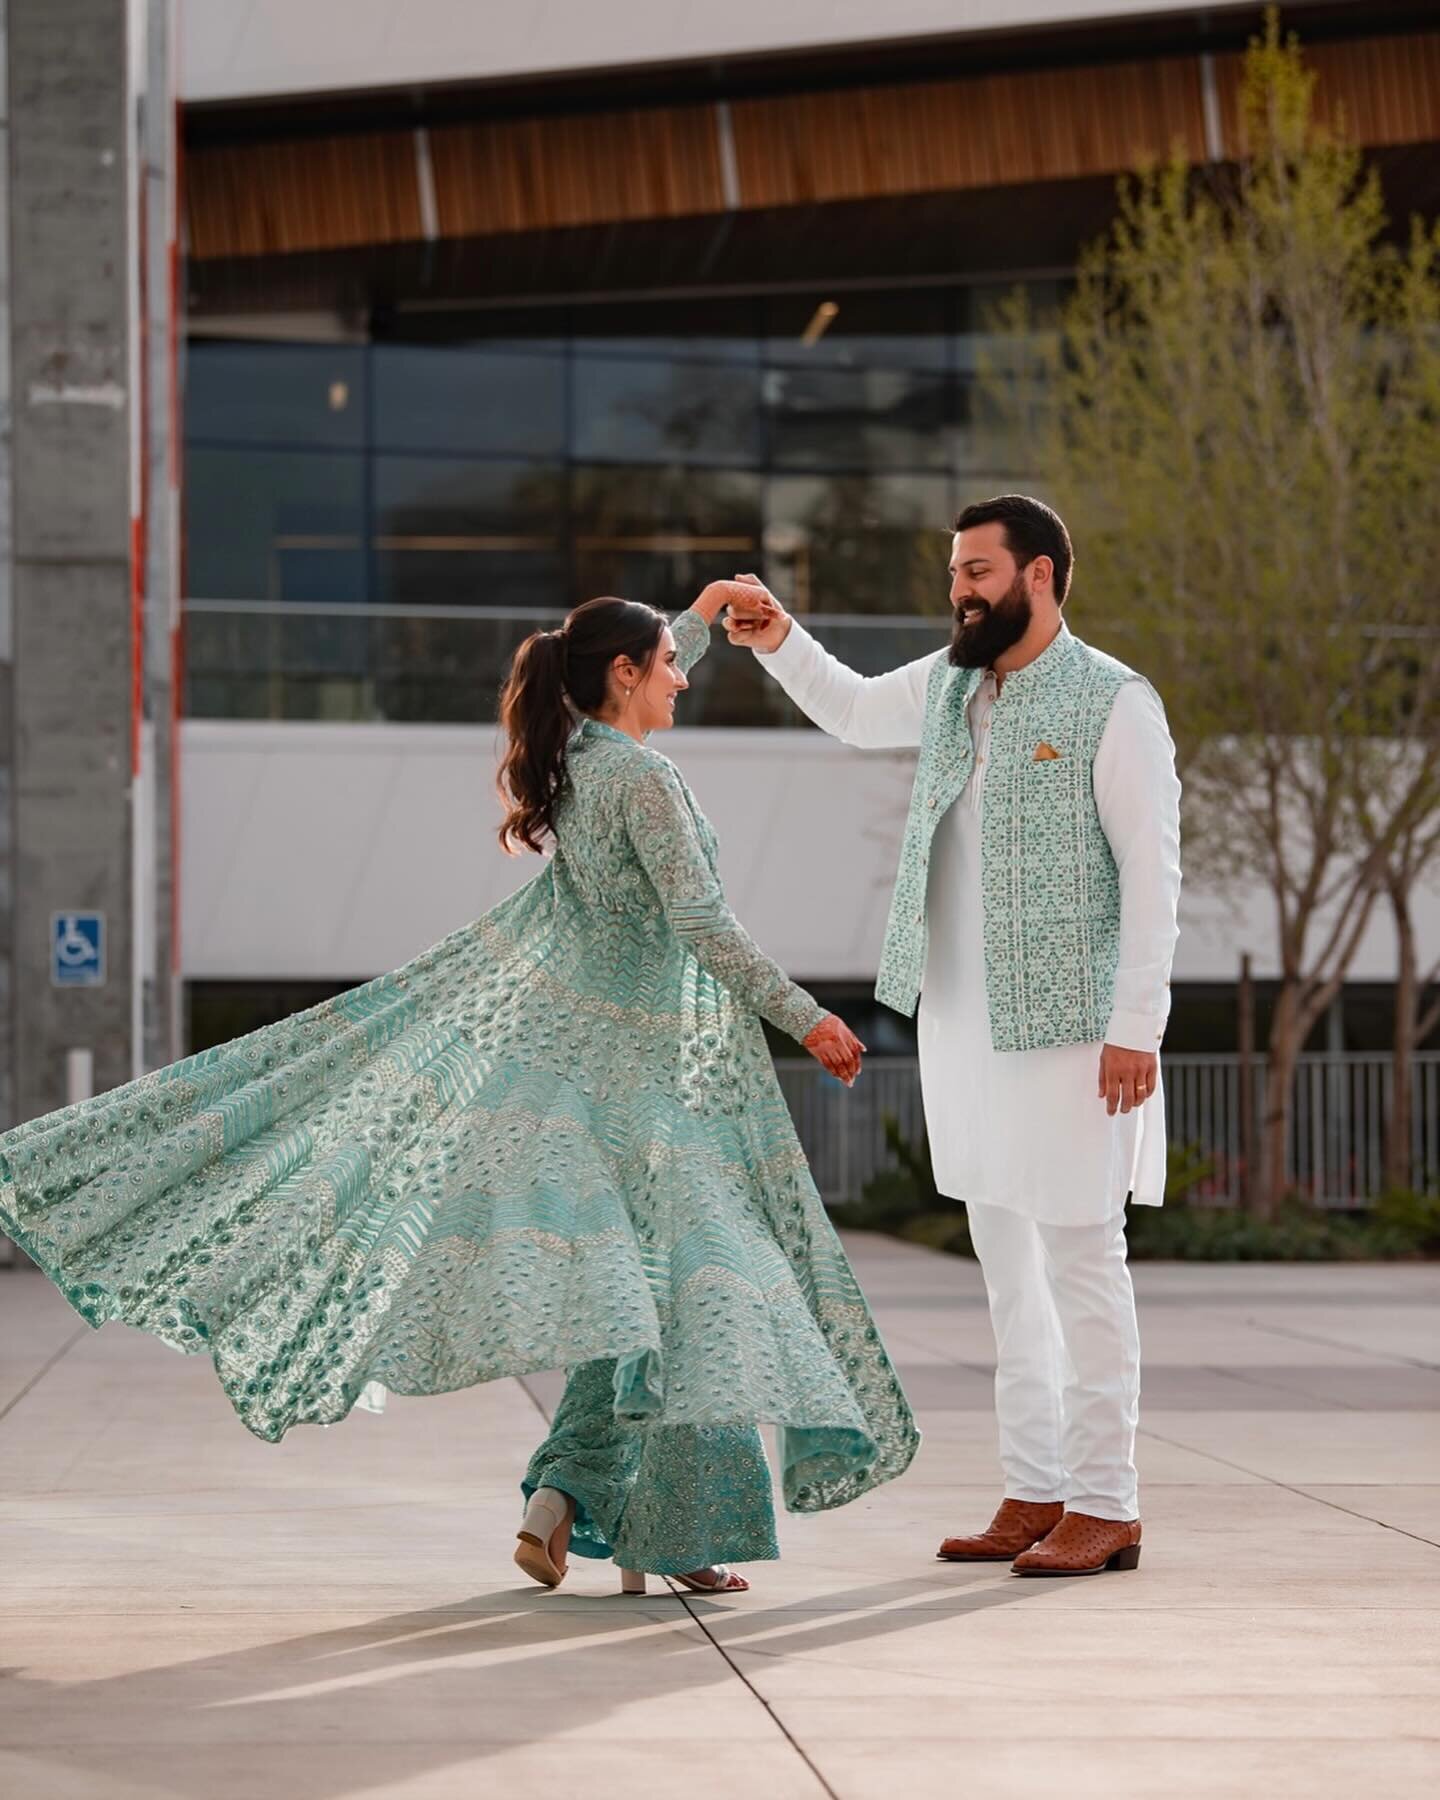 Sachi steals the spotlight for her Sangeet in a bespoke fusion ensemble, a symphony of cultures embodied in her attire. ✨ 

Bride&rsquo;s Outfit: @swaticouture 
Planning &amp; Coordination: @threewishesplanning
Venue: @theglasshousesj
Photography: @m